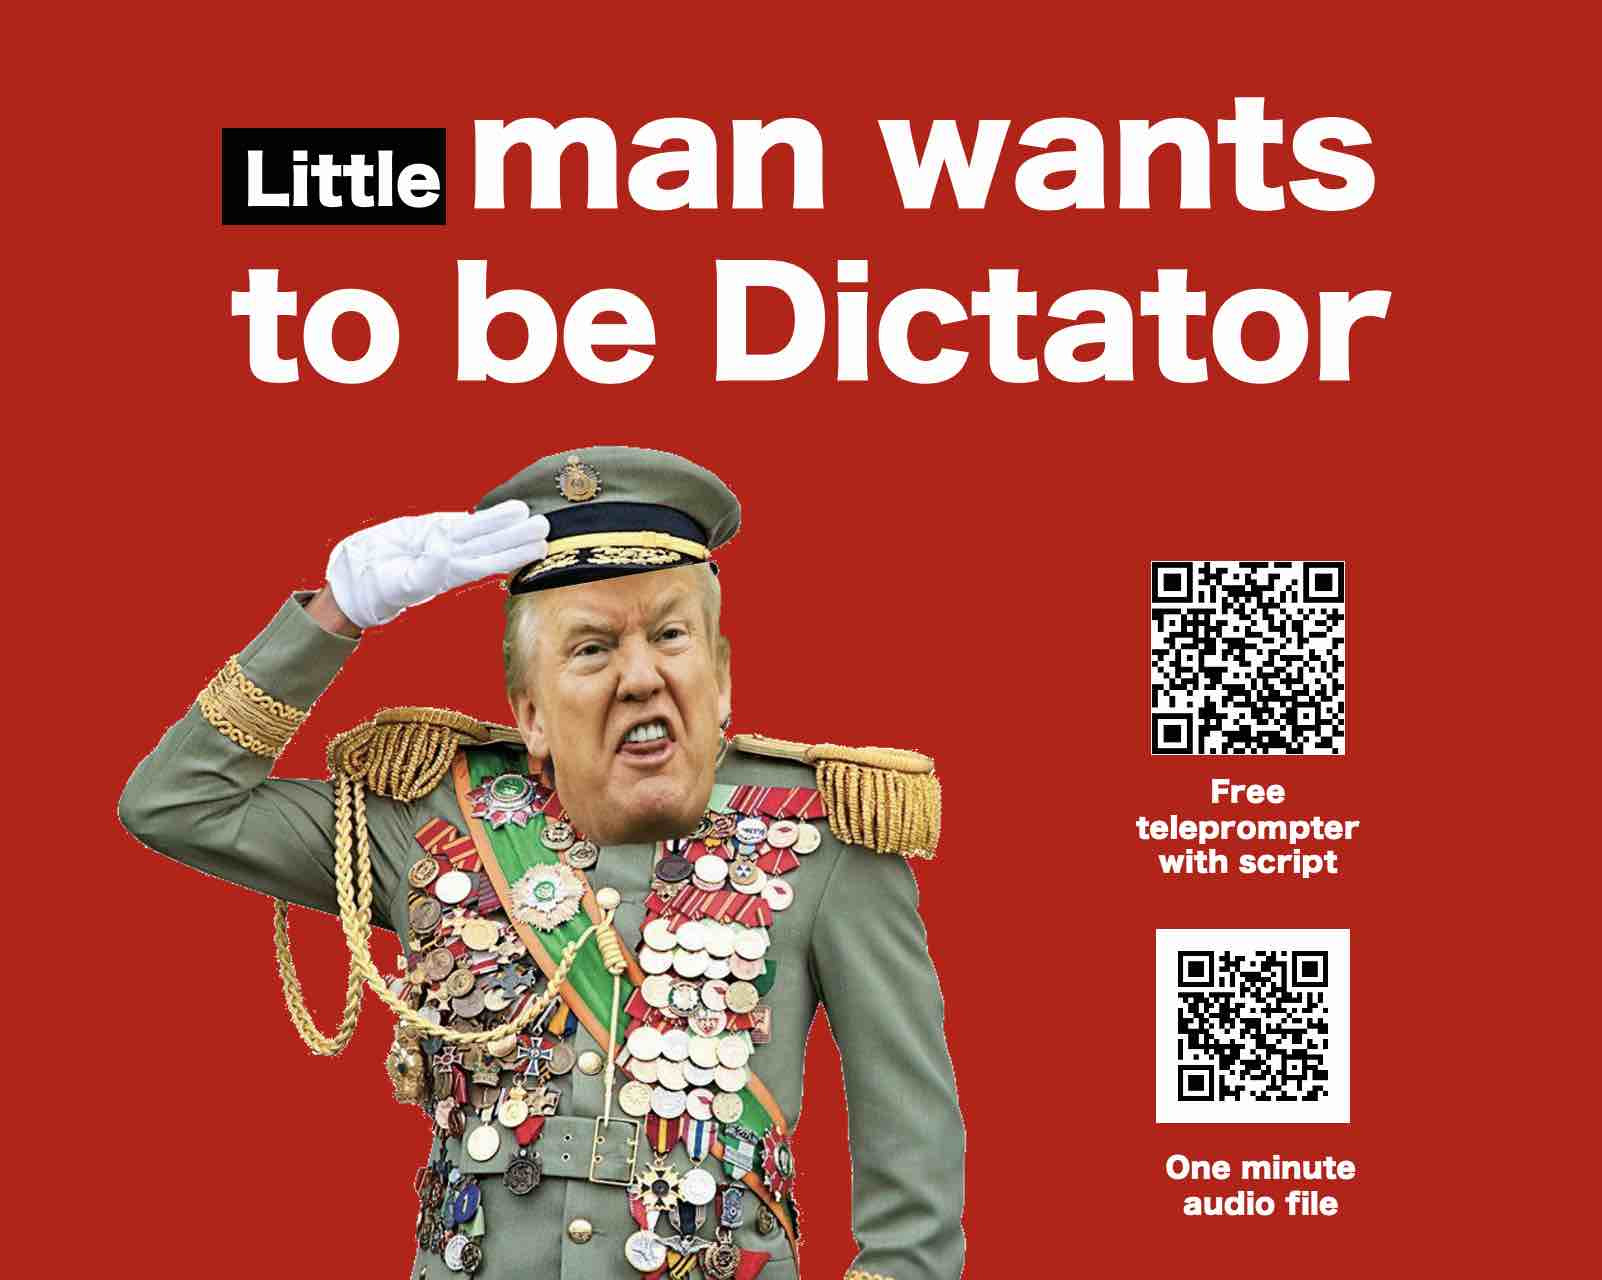 Little man wants to be dictator - script and audio file